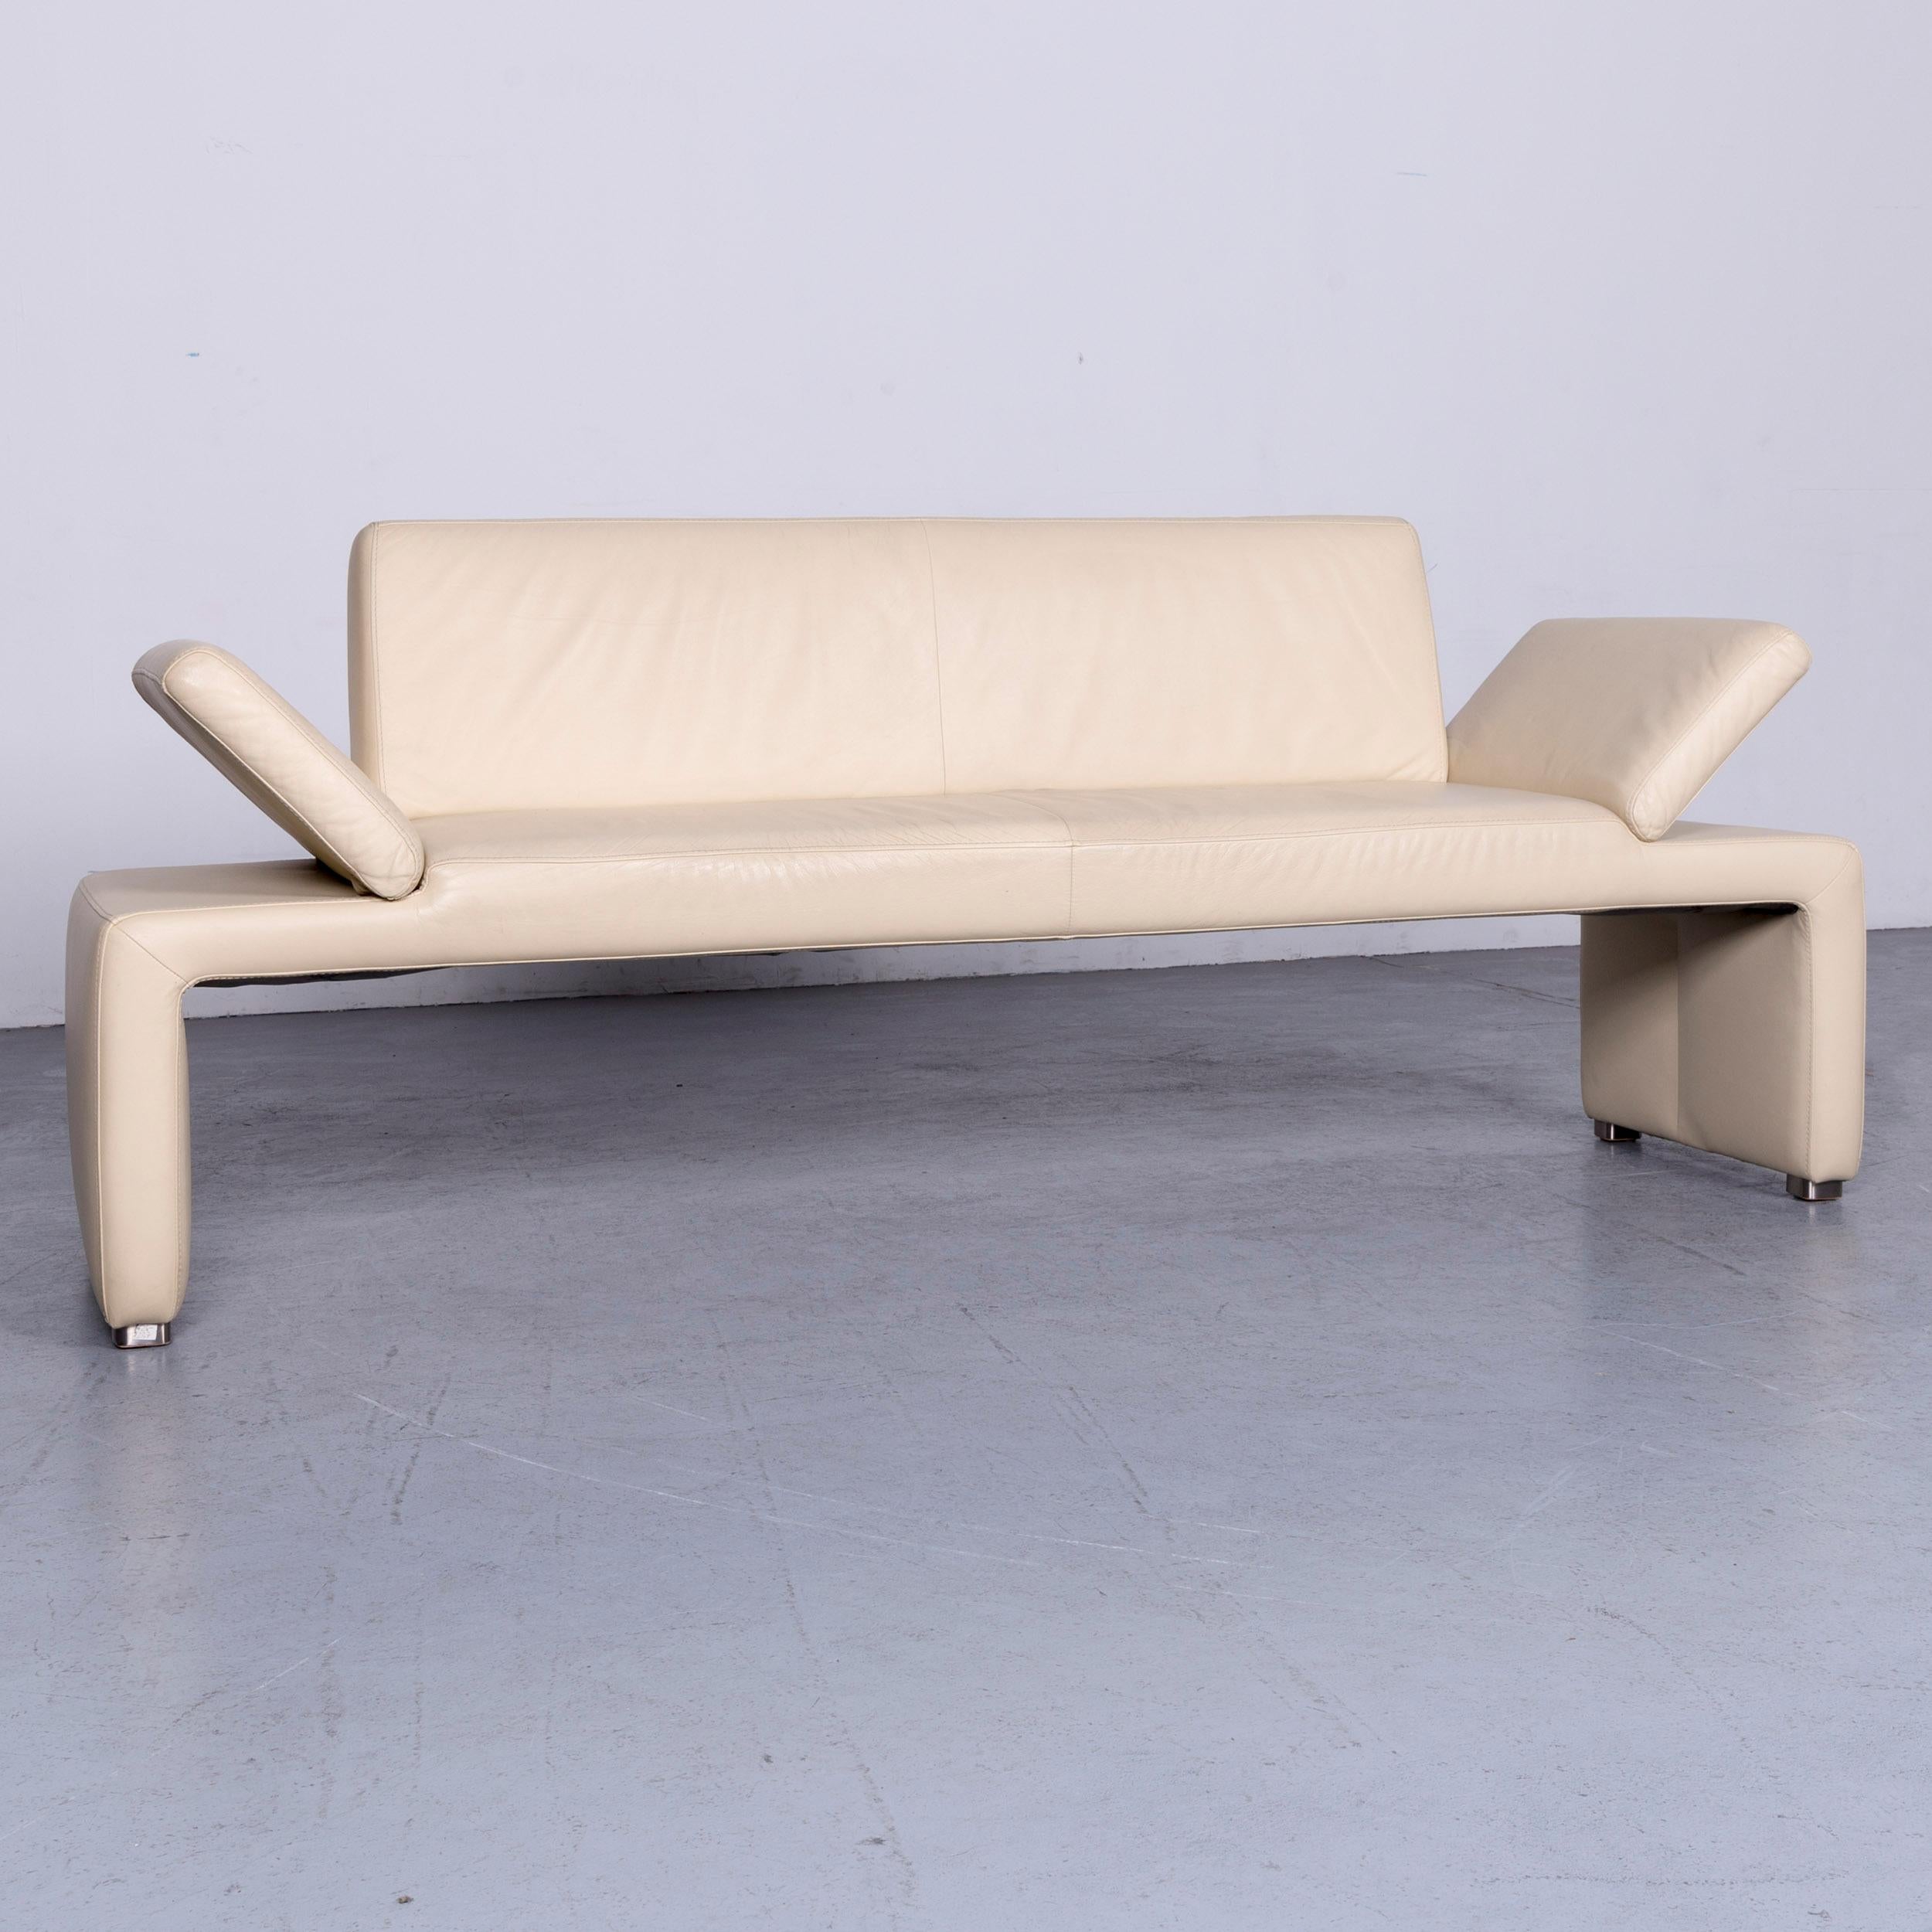 We bring to you a Willi Schillig designer leather sofa crème three-seat couch.































